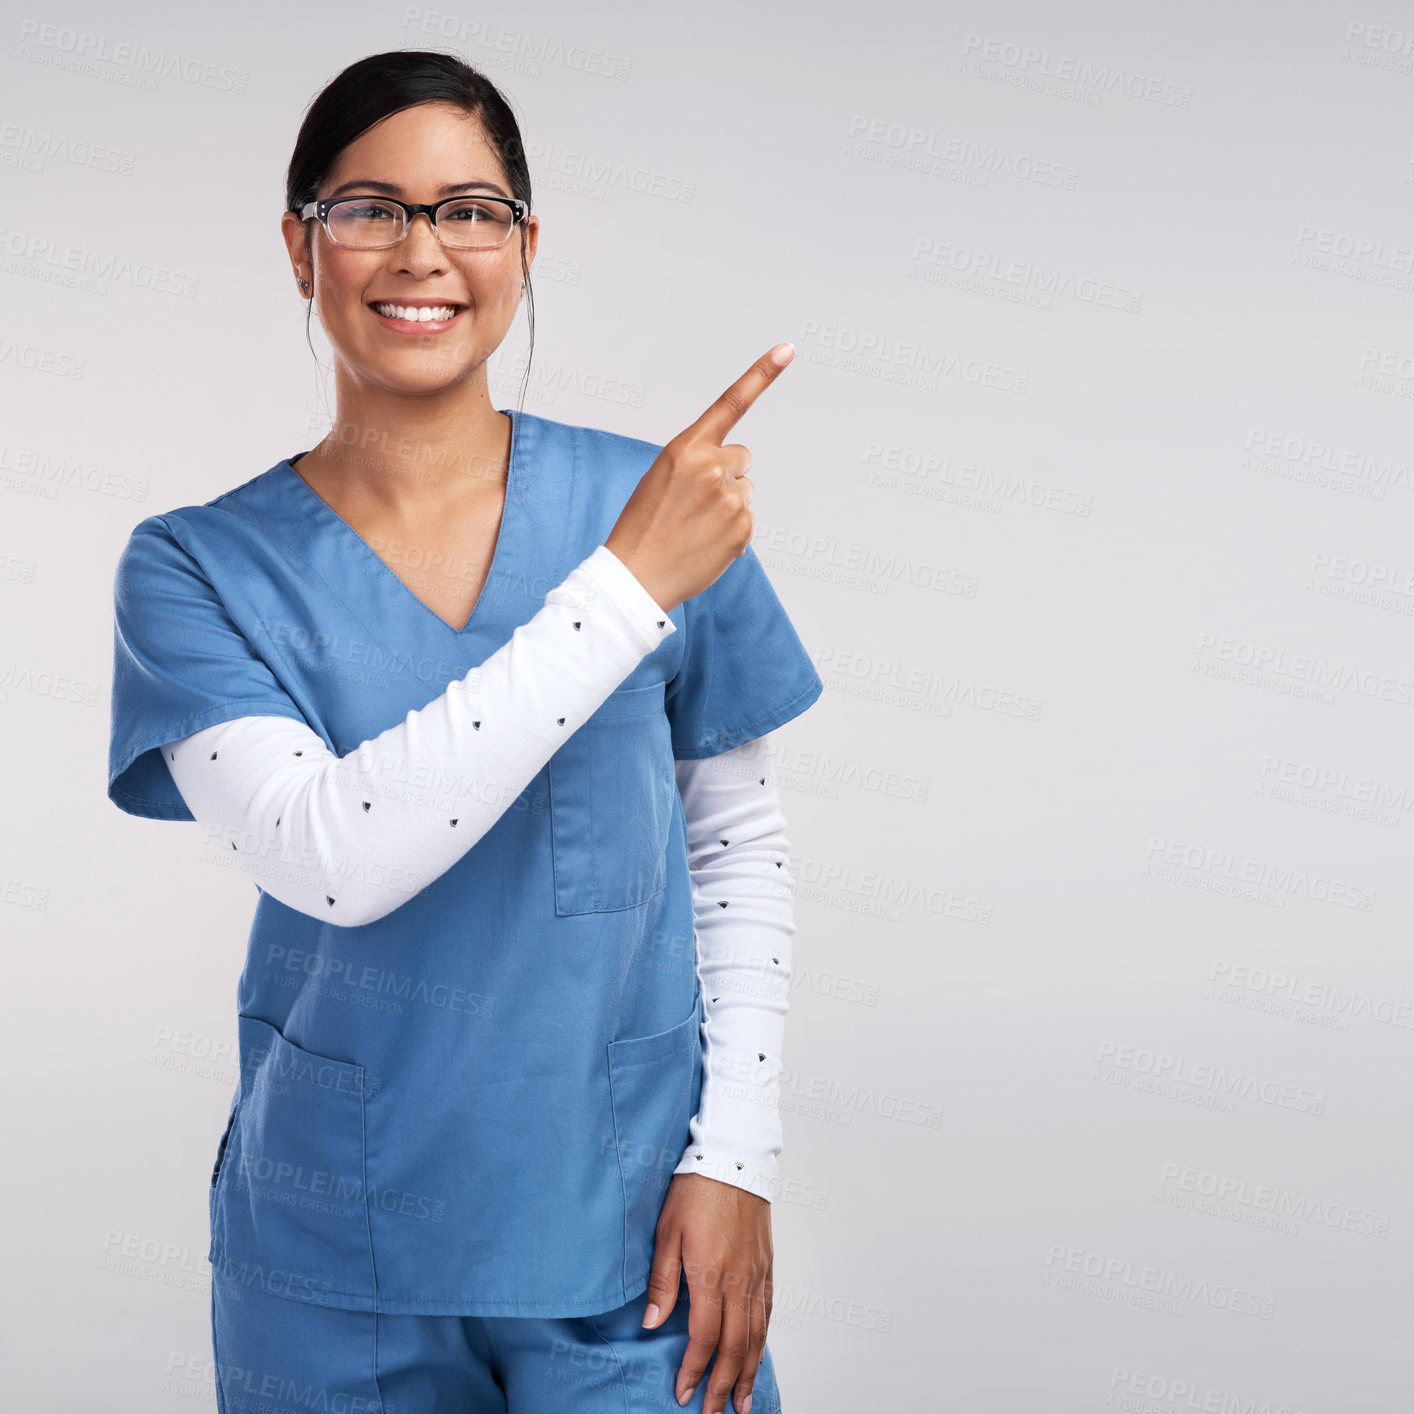 Buy stock photo Portrait of a young doctor wearing glasses and scrubs, pointing to her left against a white background